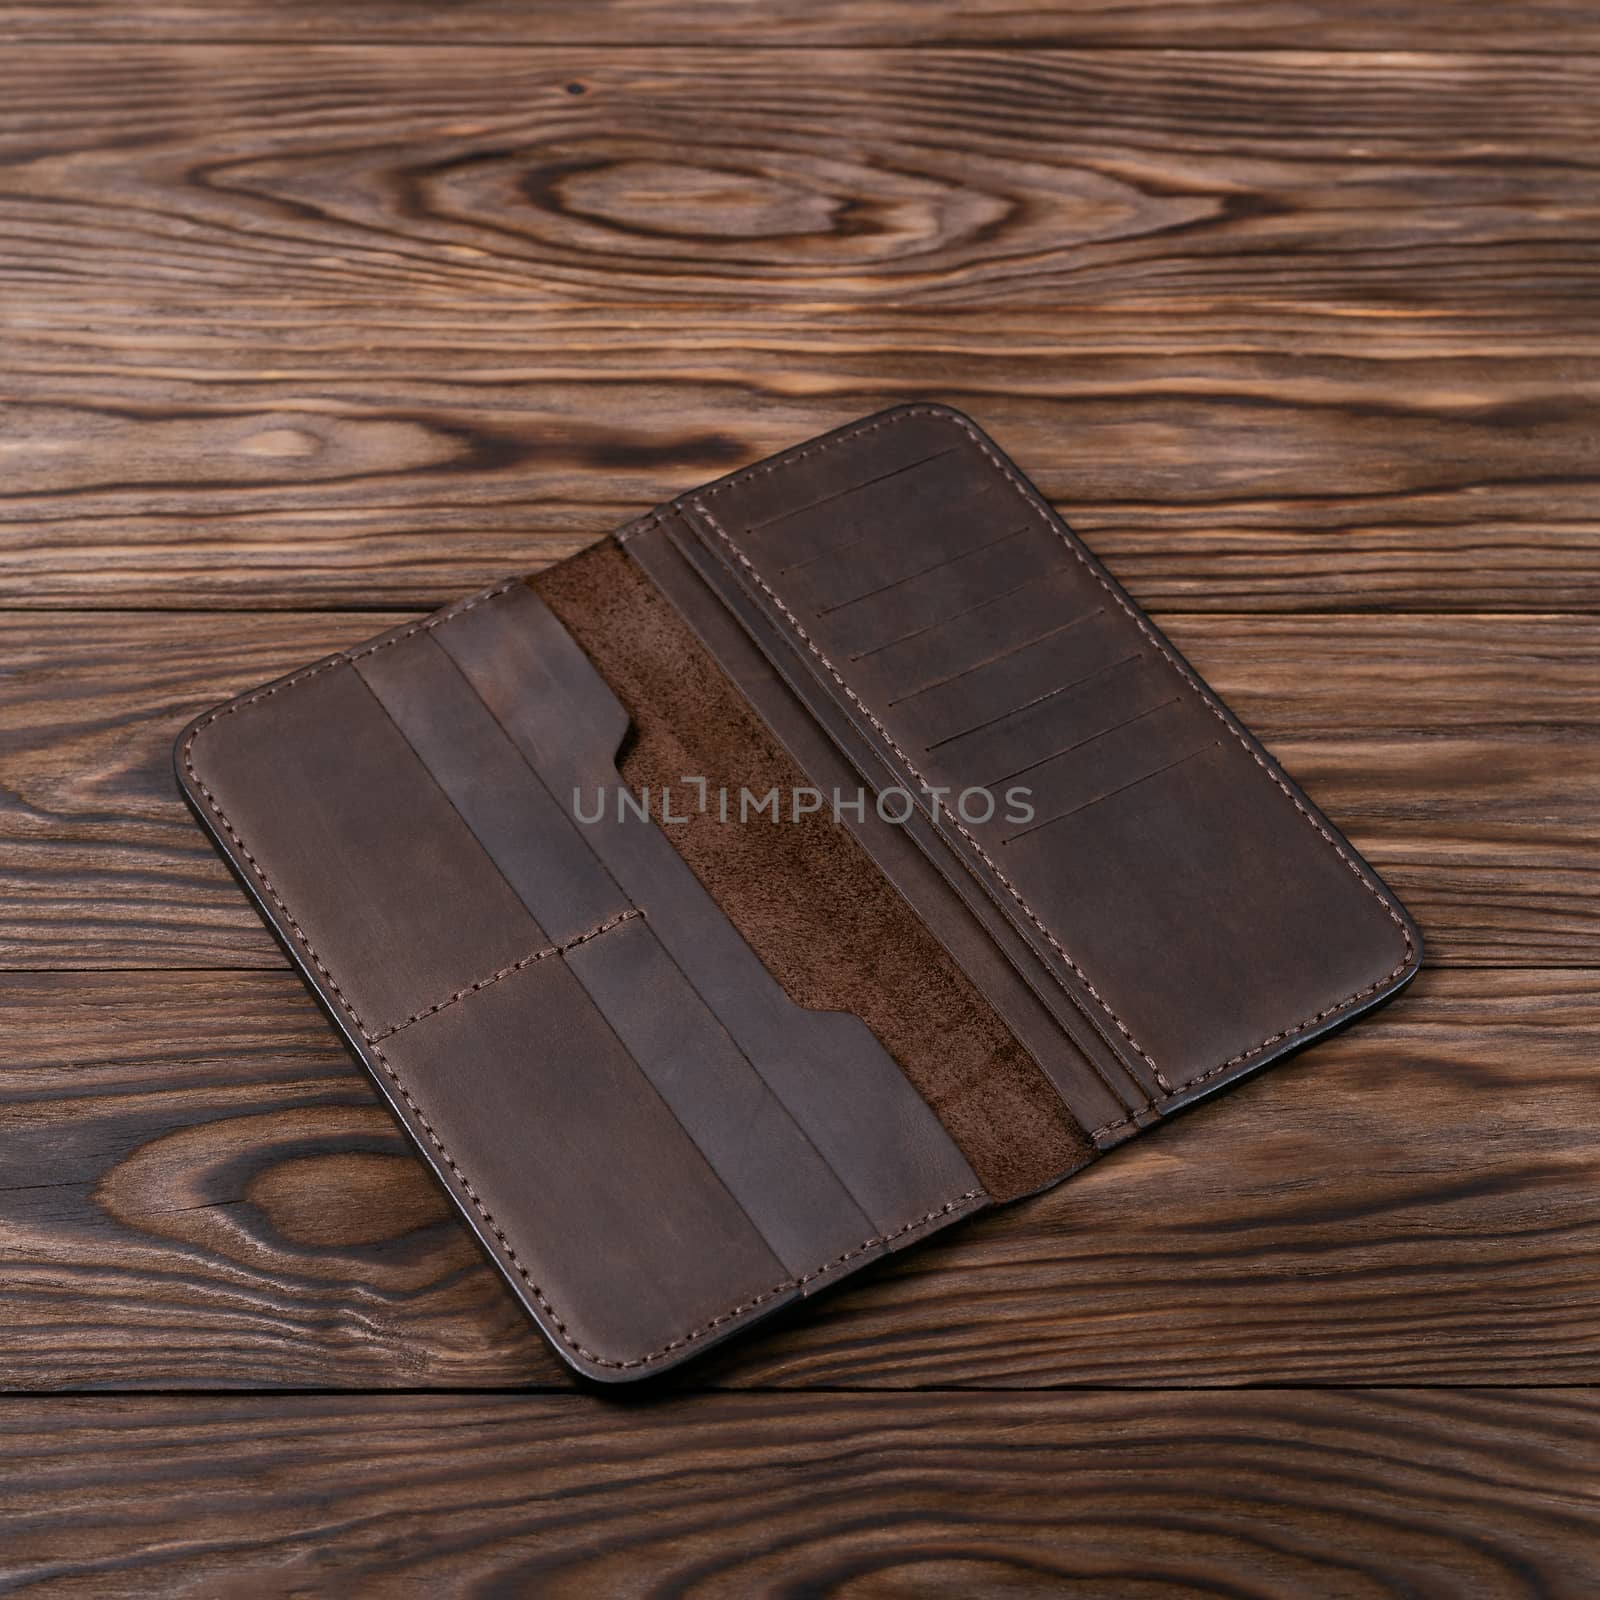 Brown color handmade leather porte-monnaie on wooden textured background. Purse is opened and empty. Side view. Stock photo of luxury accessories.